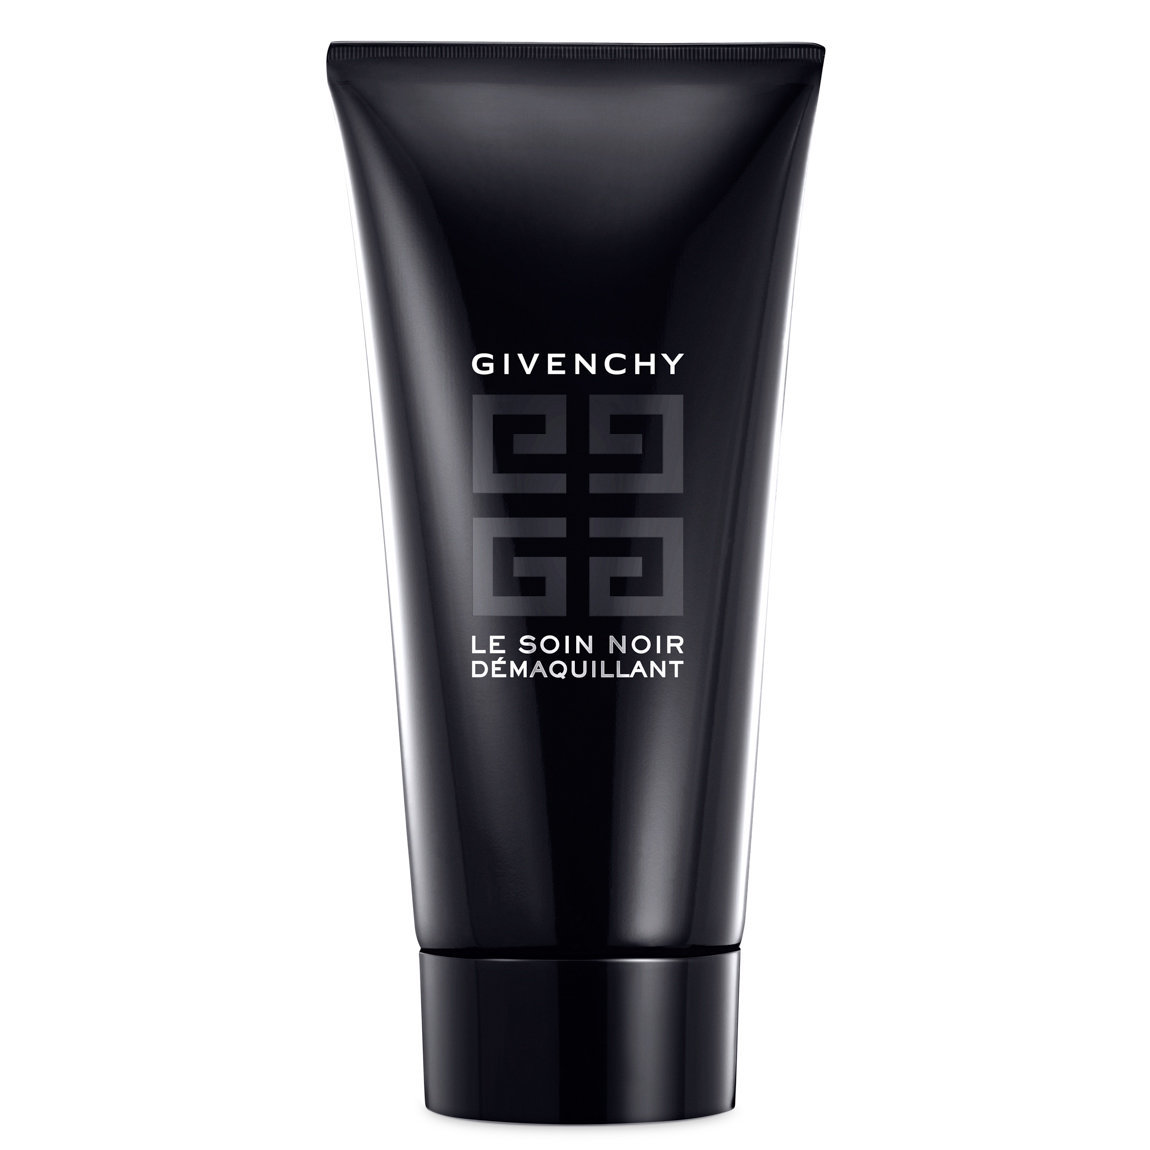 Givenchy Le Soin Noir Make Up Remover alternative view 1 - product swatch.